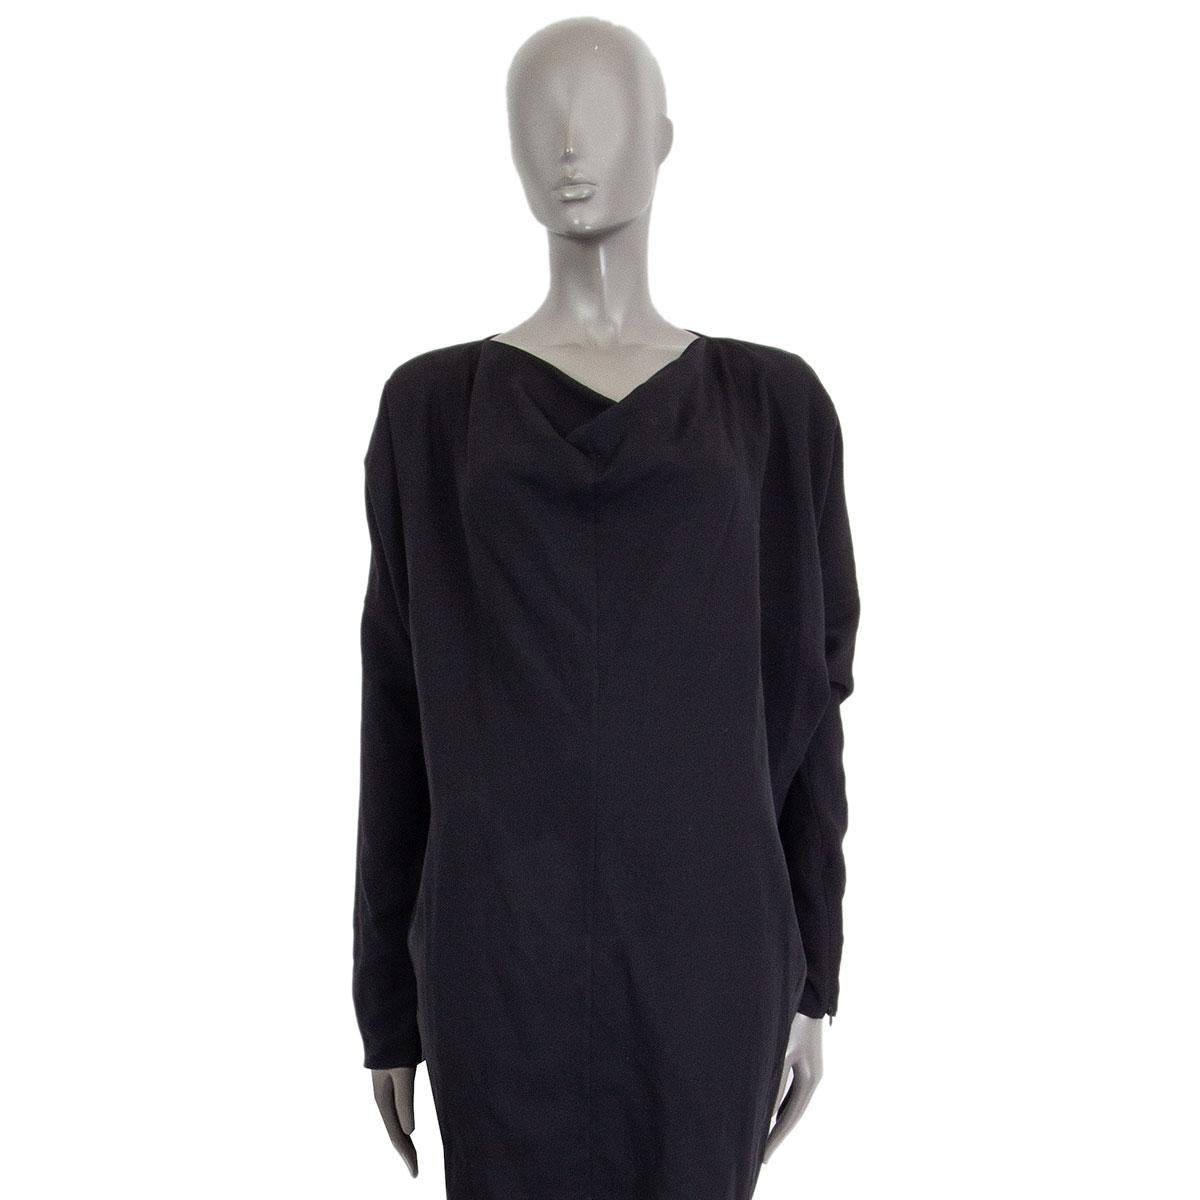 
100% authentic Maison Martin Margiela long sleeve oversized dress in black wool (100%) with a draped neck-line, a vertical cut along the mid-frontal line and with zipped sleeves hems. Unlined. Has been worn and is in excellent